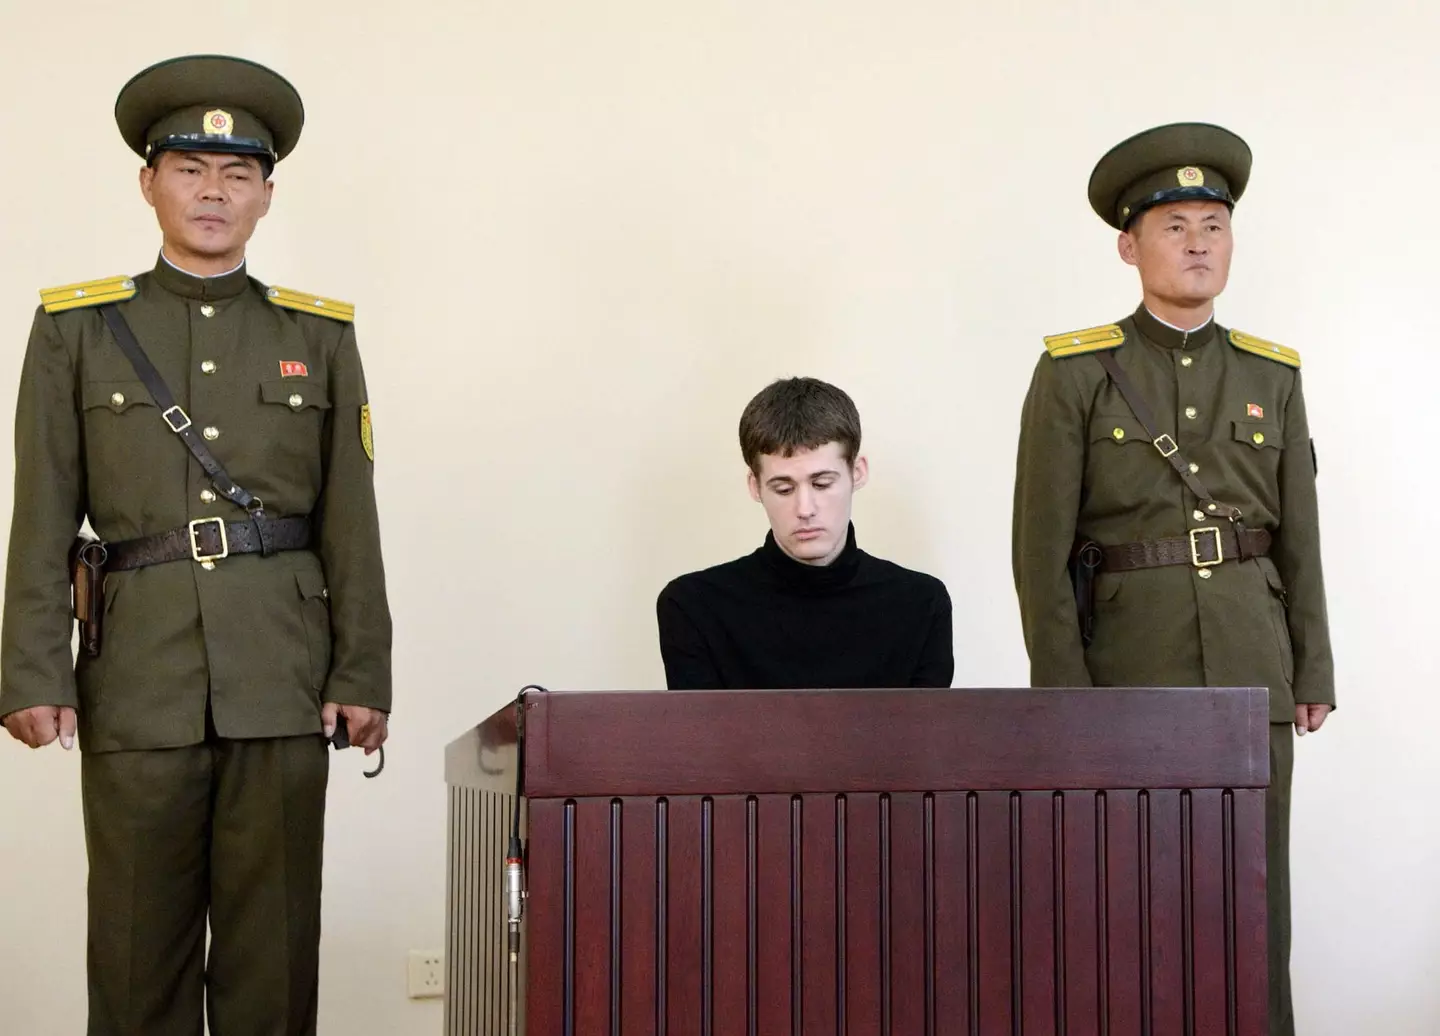 Matthew Miller travelled to North Korea with the intention of getting arrested.